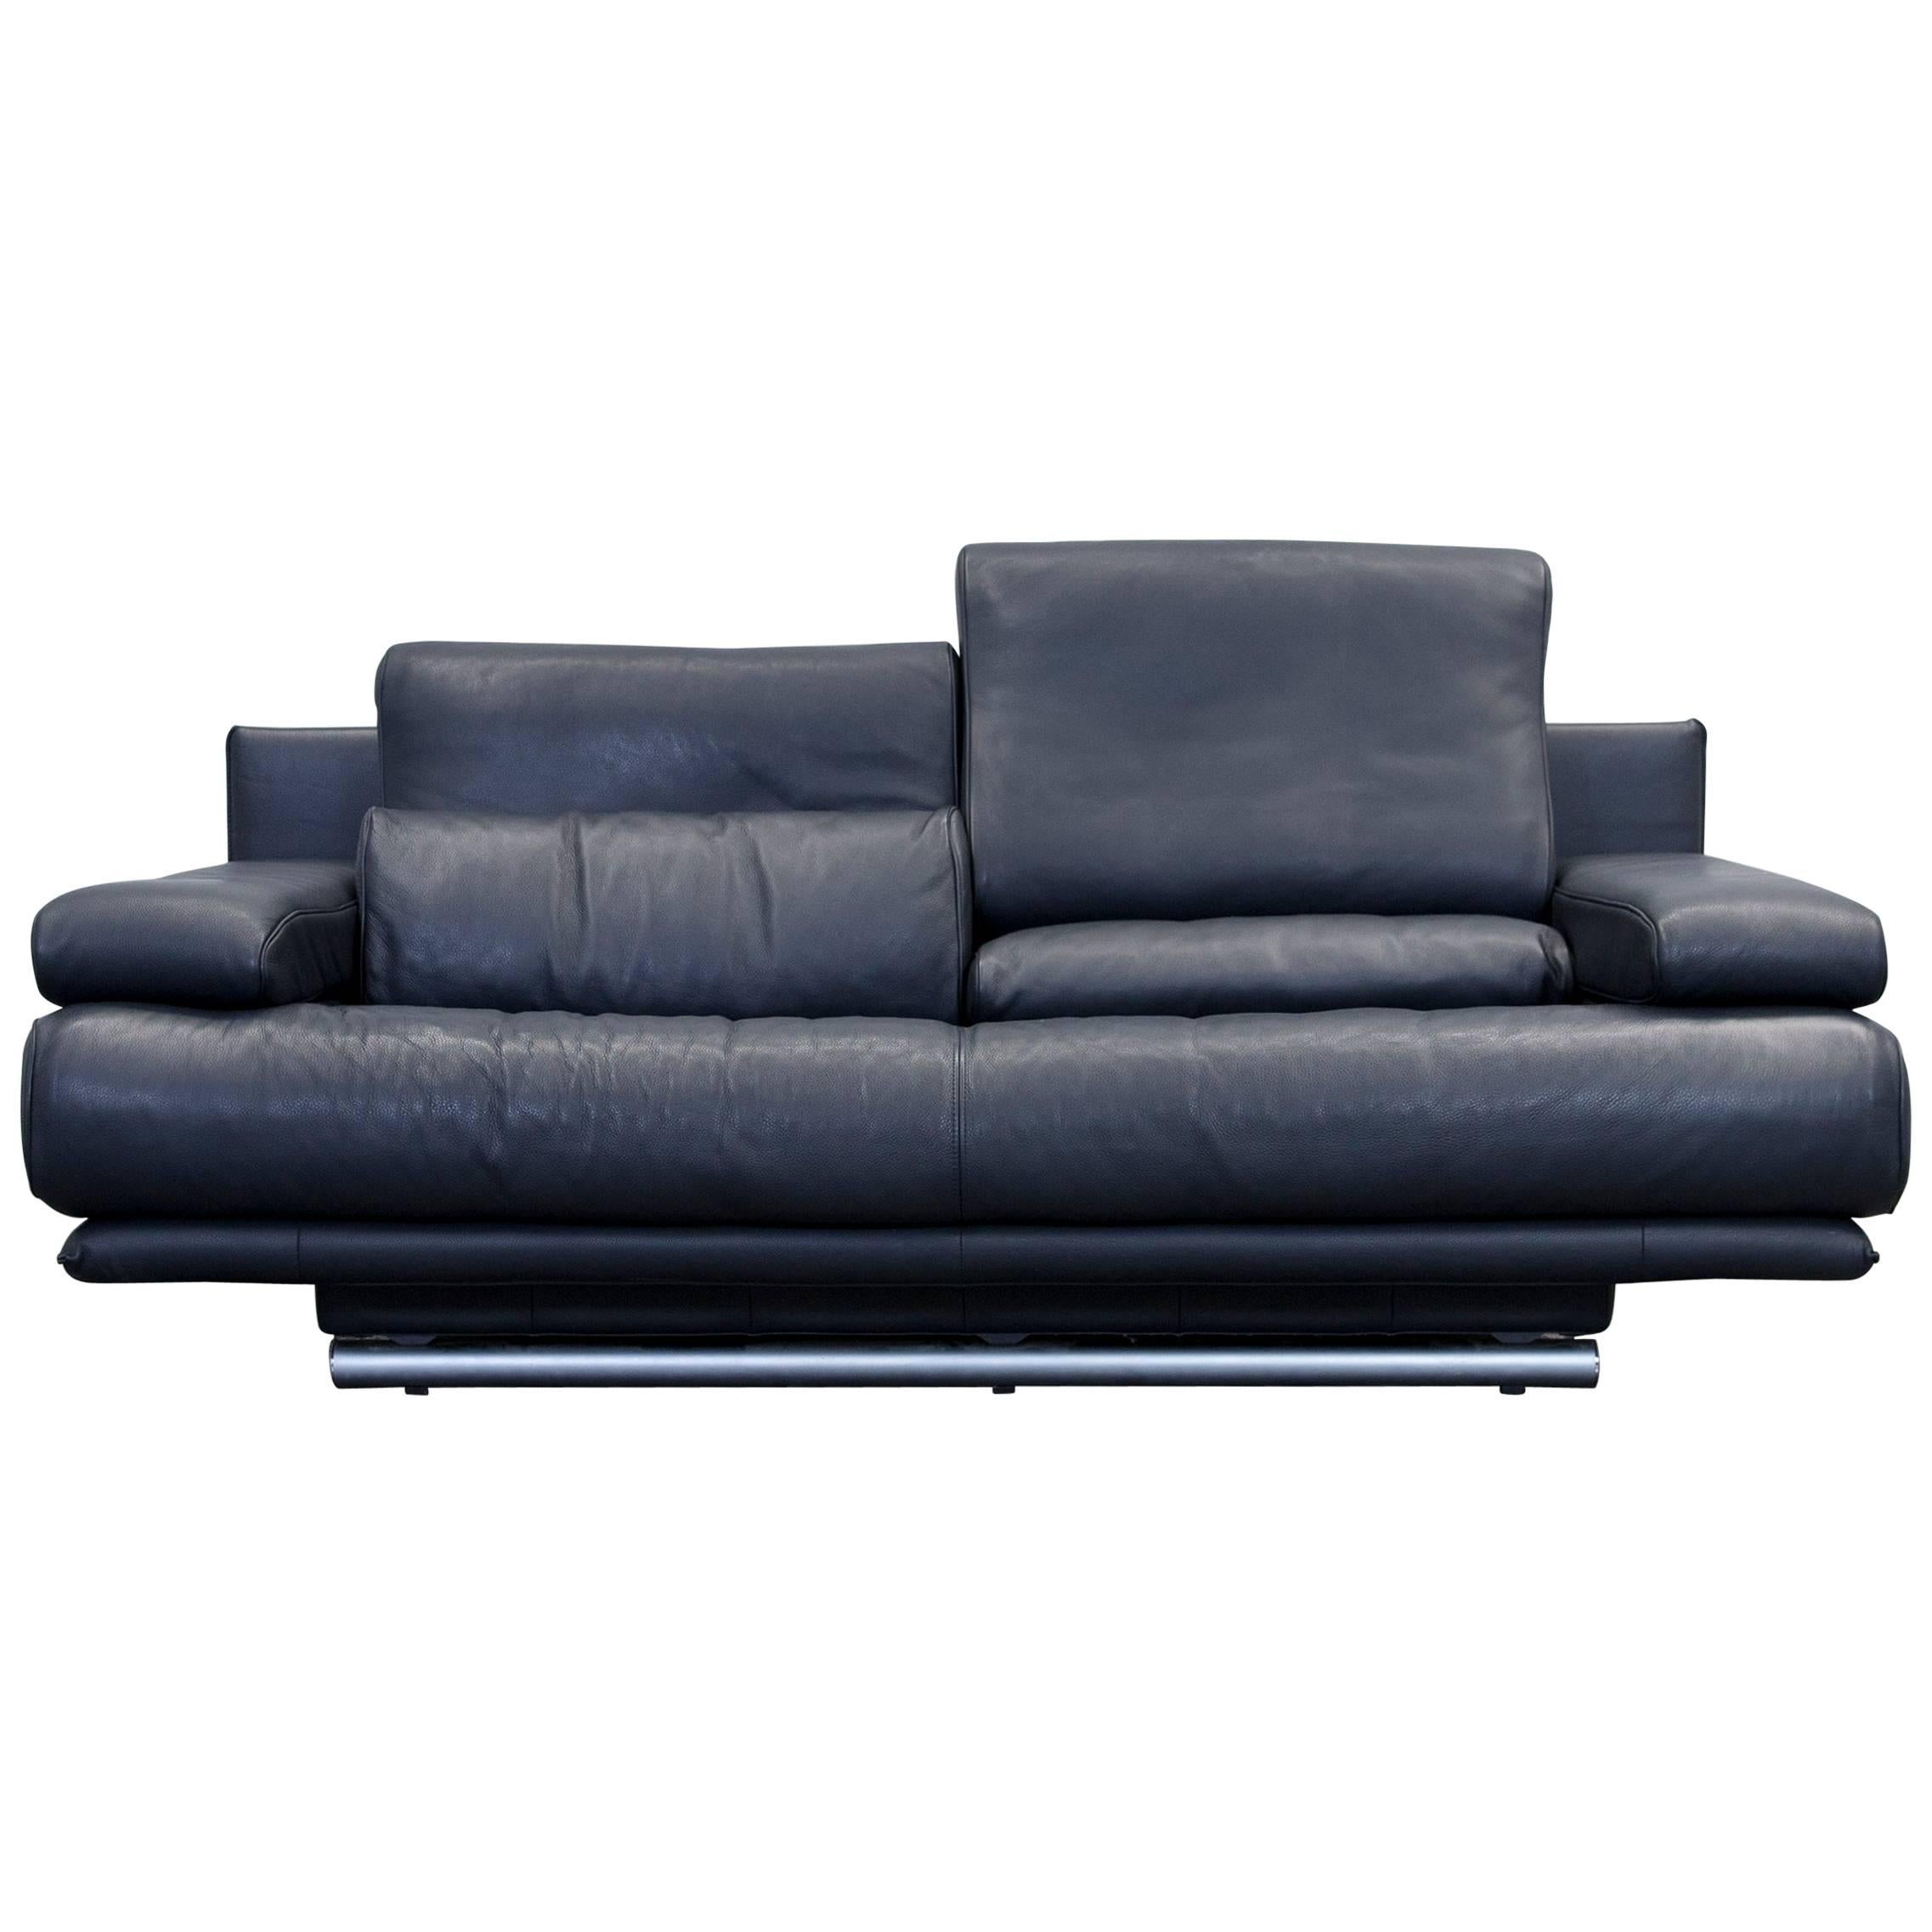 Rolf Benz 6500 Leather Sofa Black Two-Seat Couch Modern